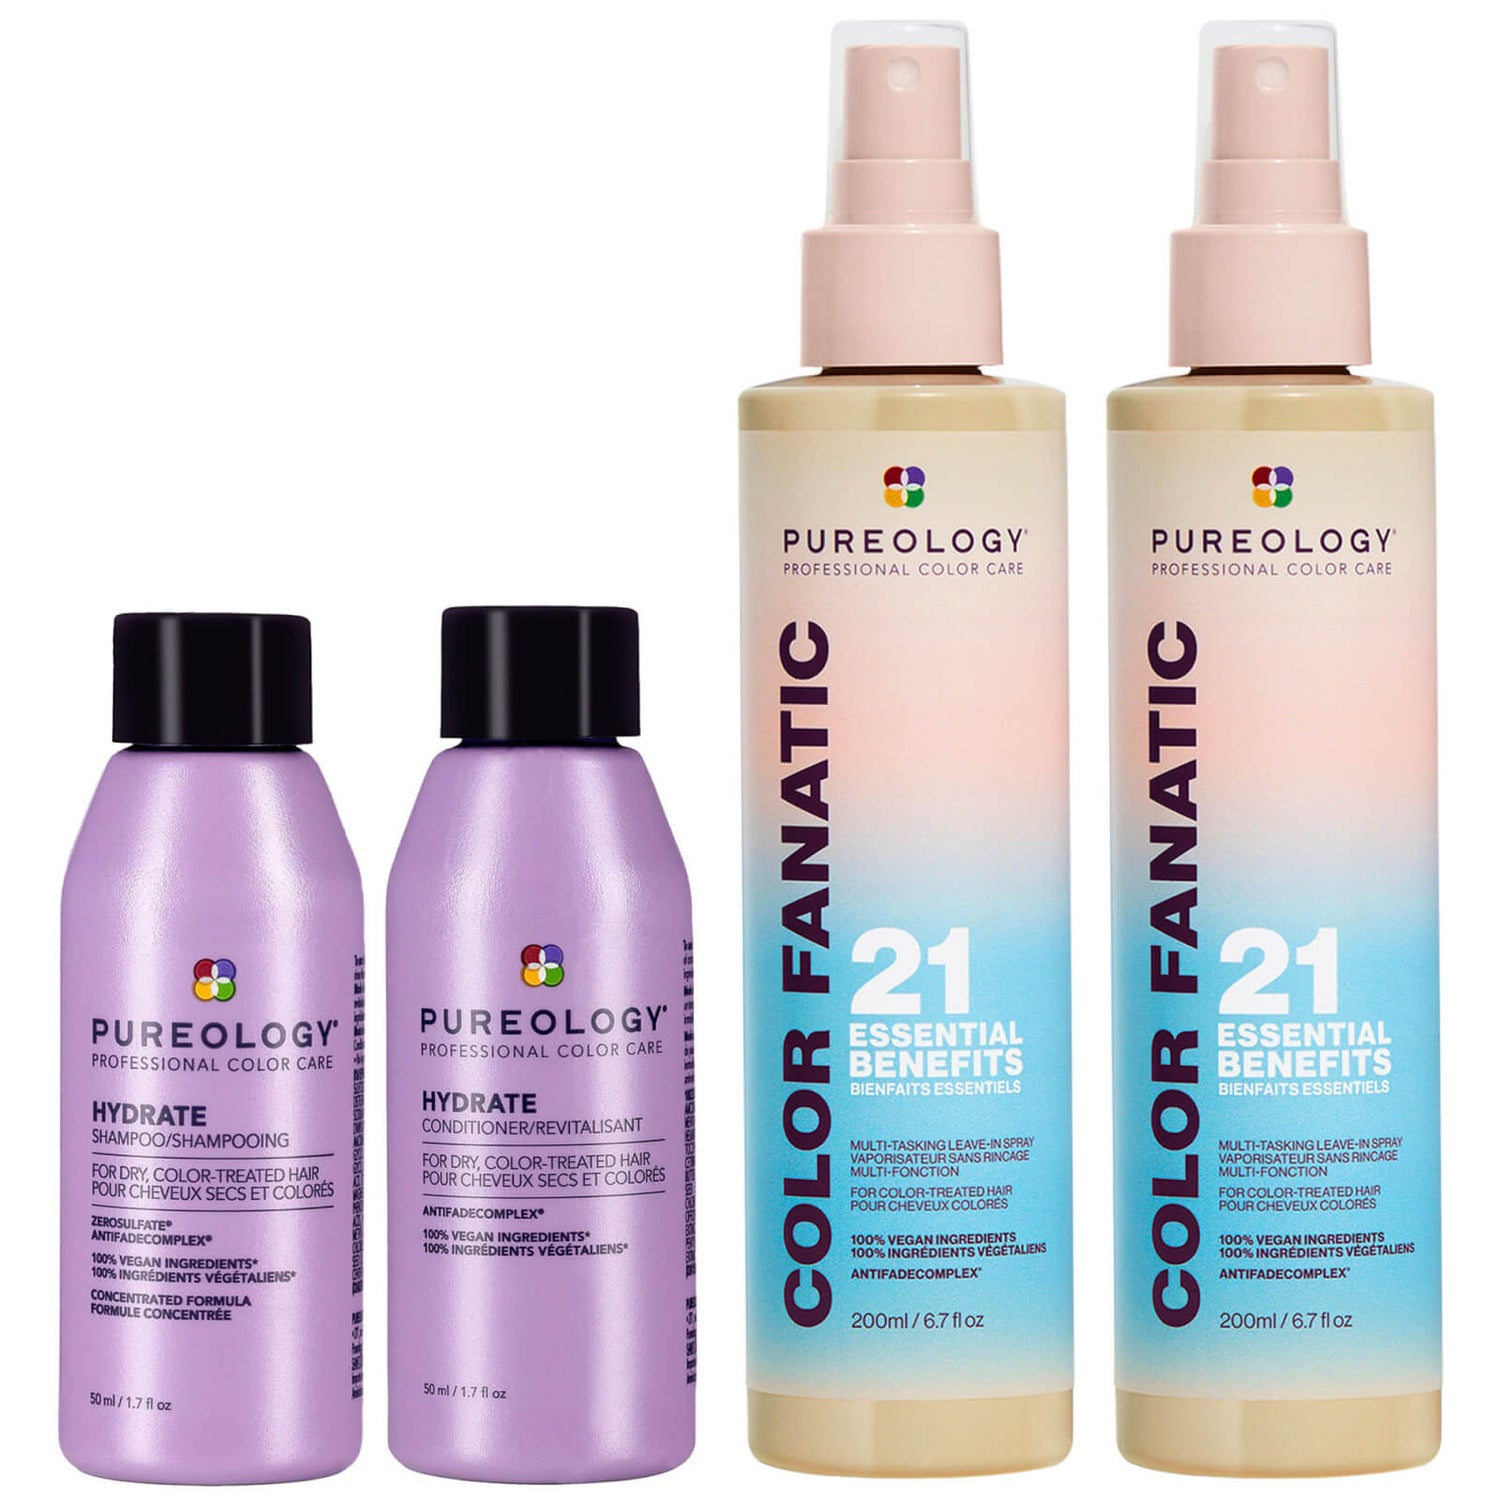 Pureology Color Fanatic Duo (2x 200ml) and Hydrate Mini Shampoo 50ml and Conditioner 50ml Routine for Dry Hair (Worth £72.46)